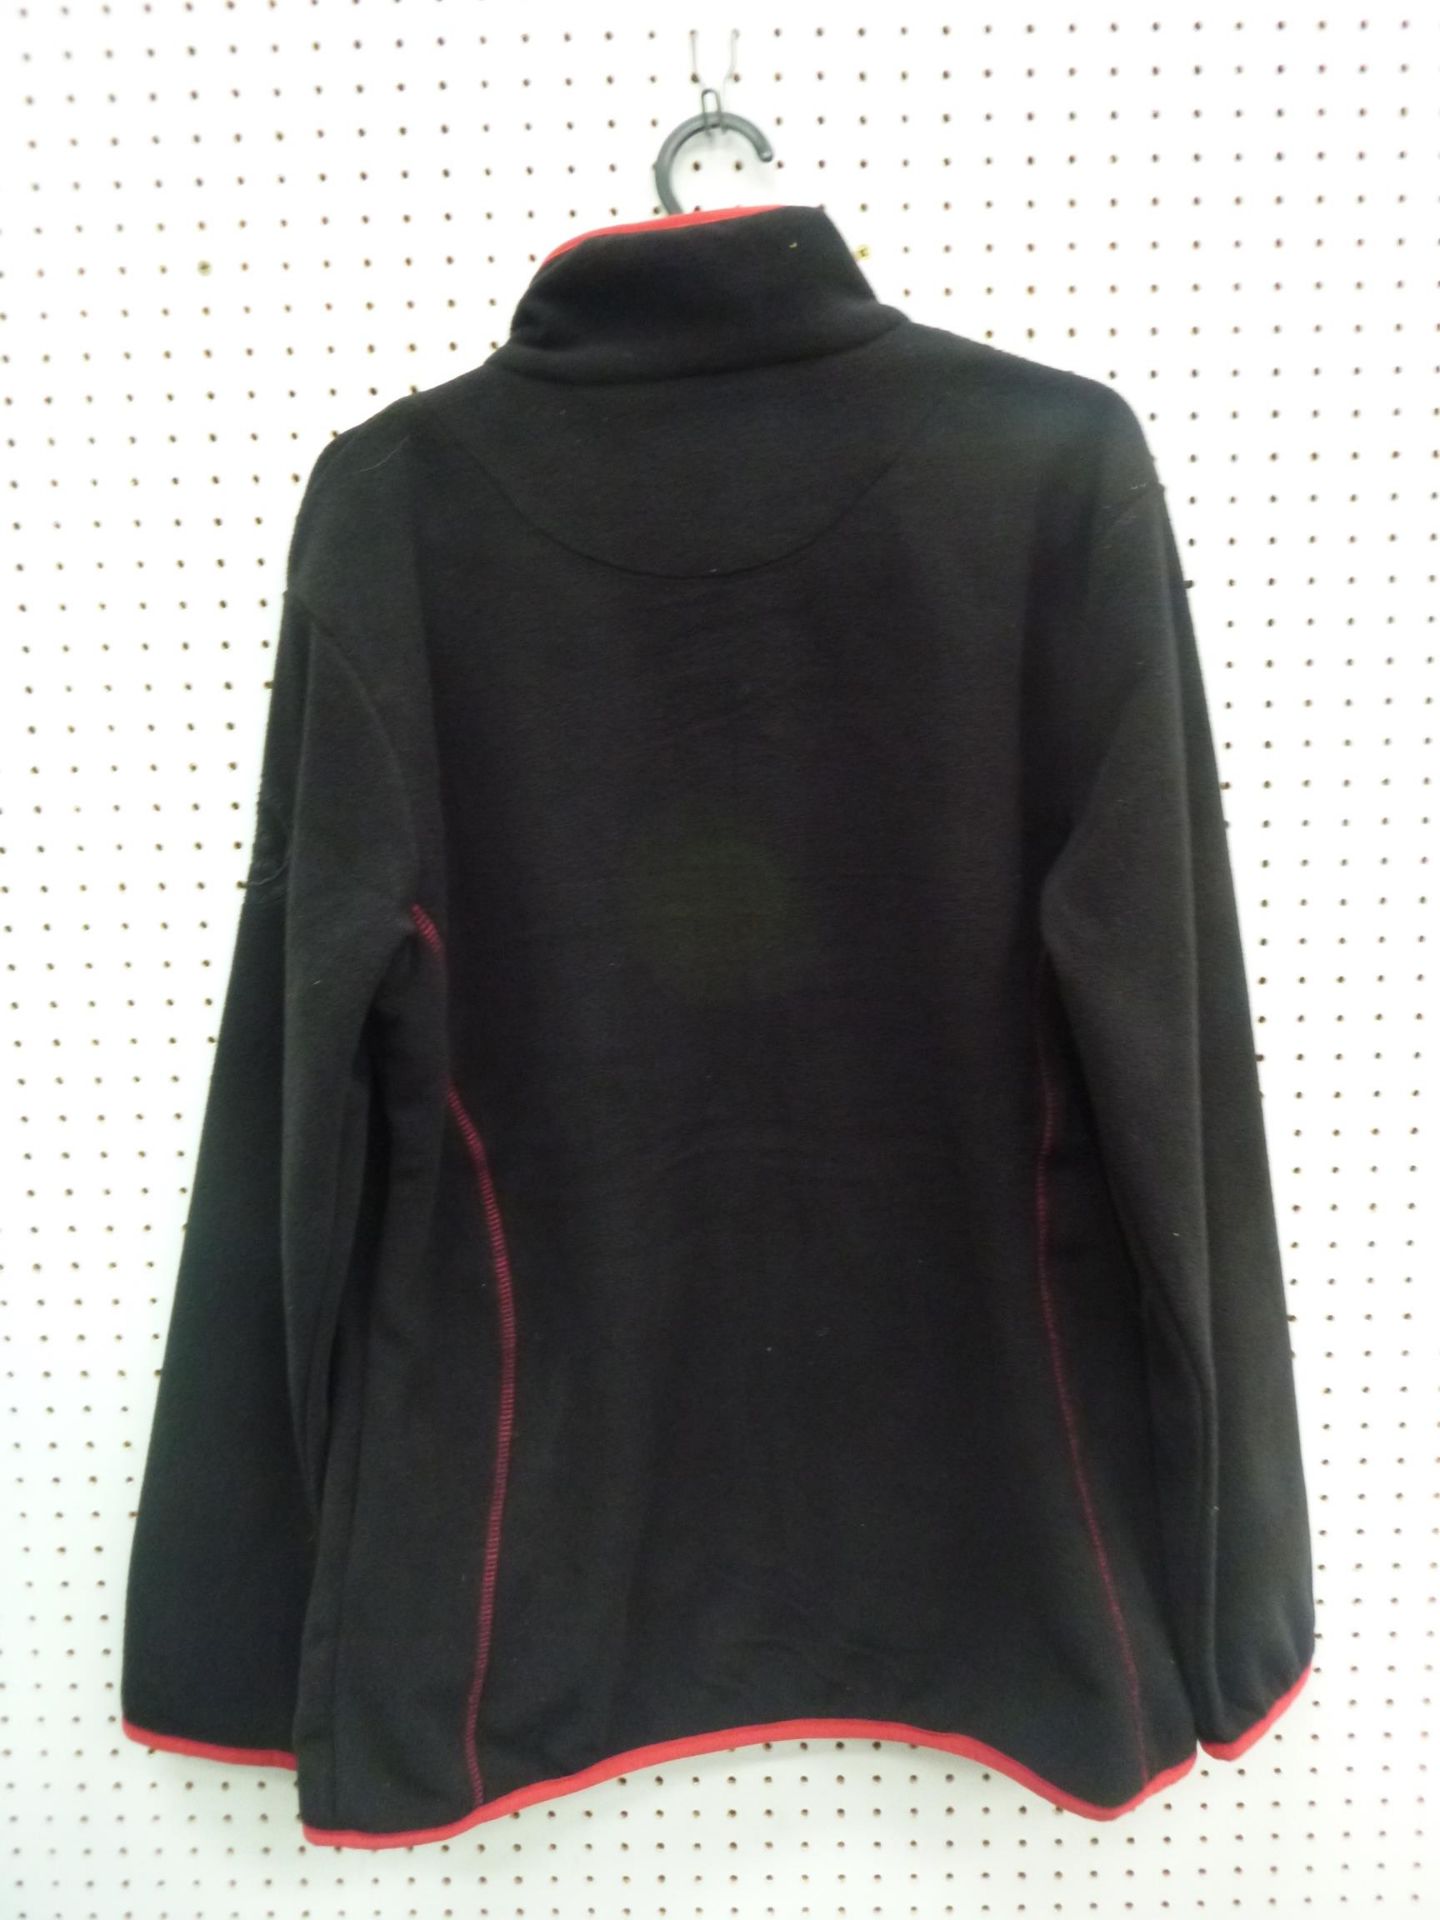 * Two New 'Bridleway' Micro Fleece Jackets, a Small in Black/Red and a Large in Red/Grey RRP £49. - Bild 4 aus 4